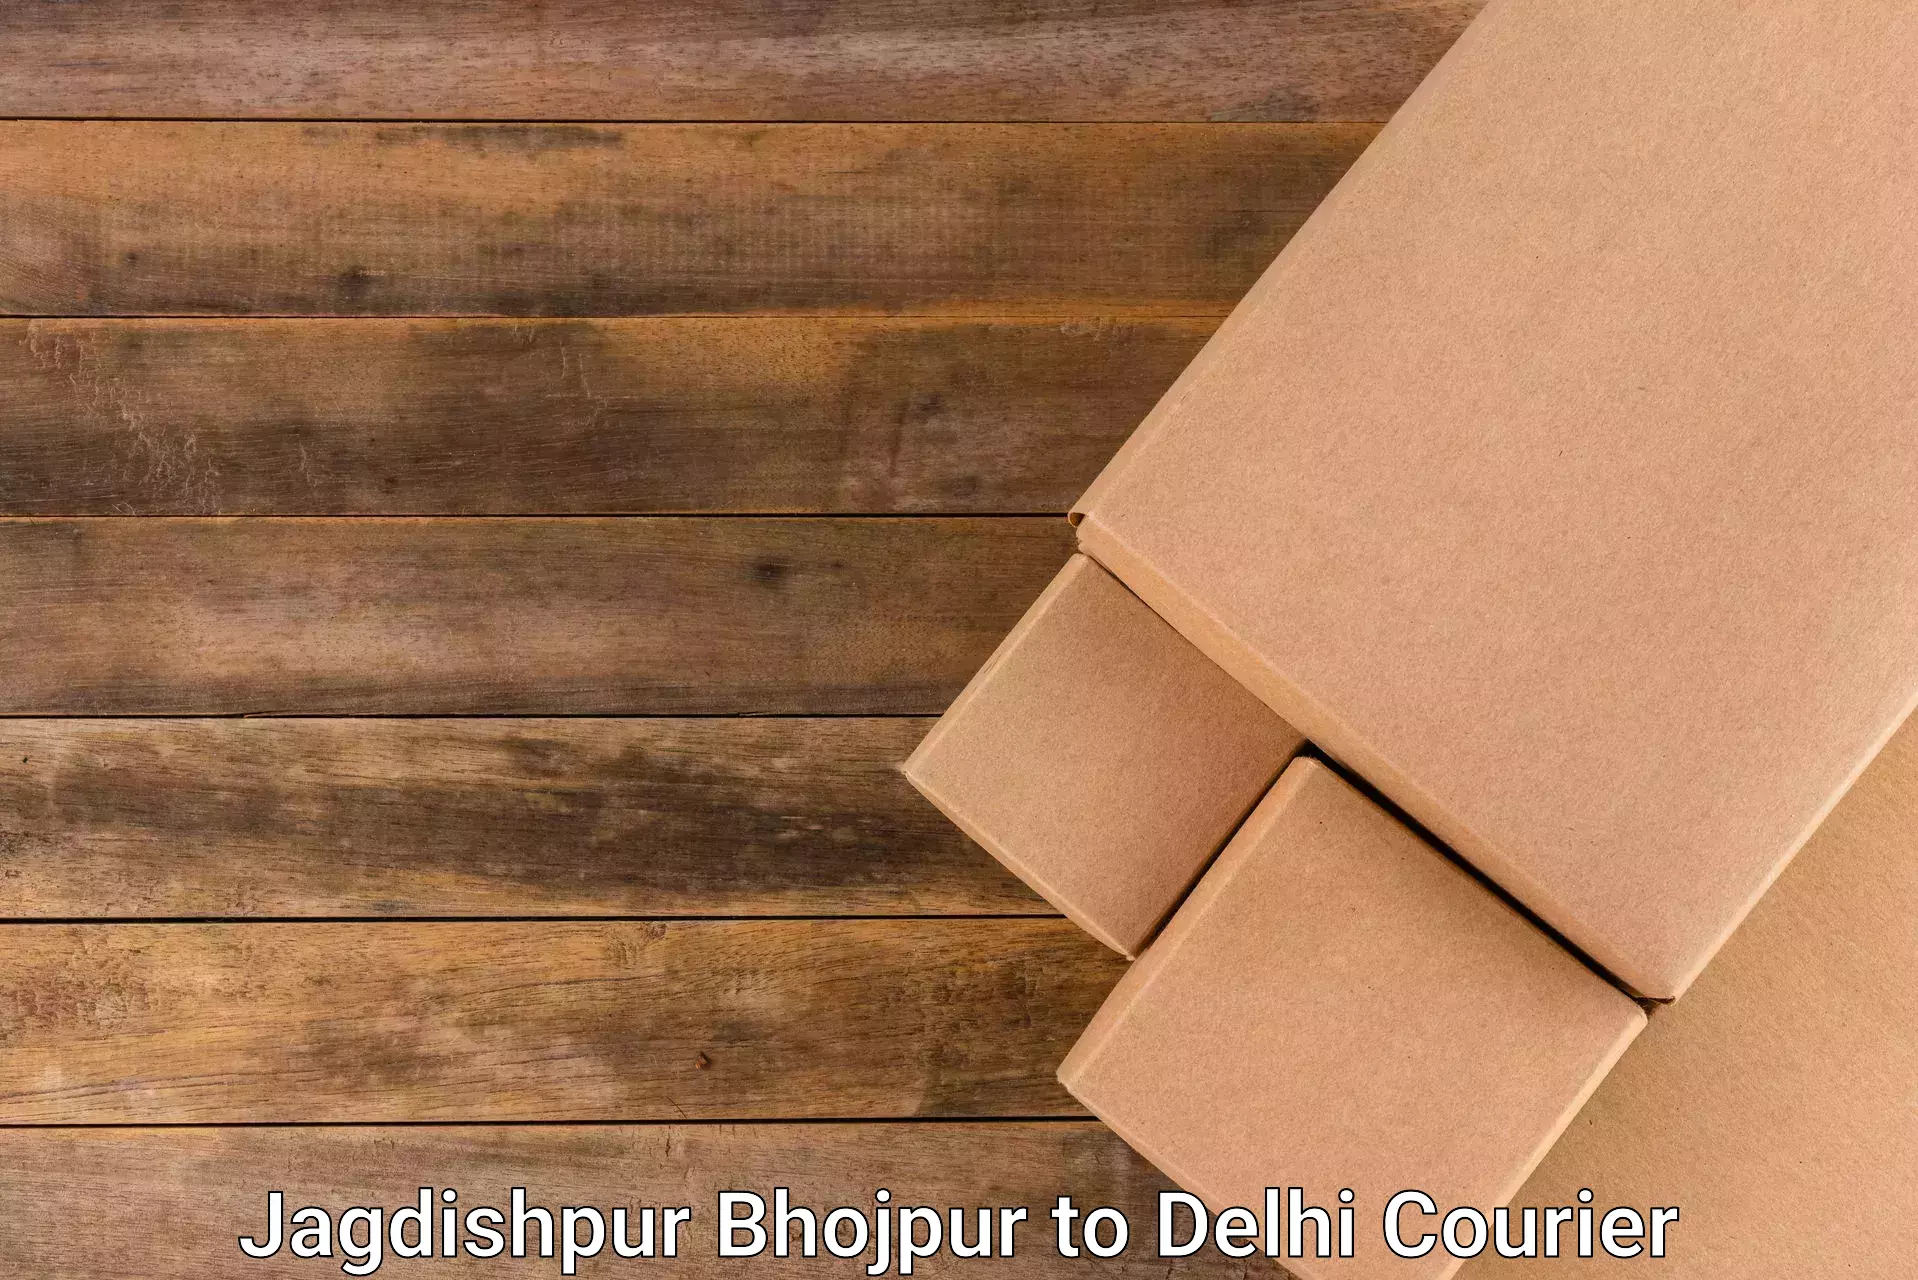 Courier service partnerships Jagdishpur Bhojpur to NCR